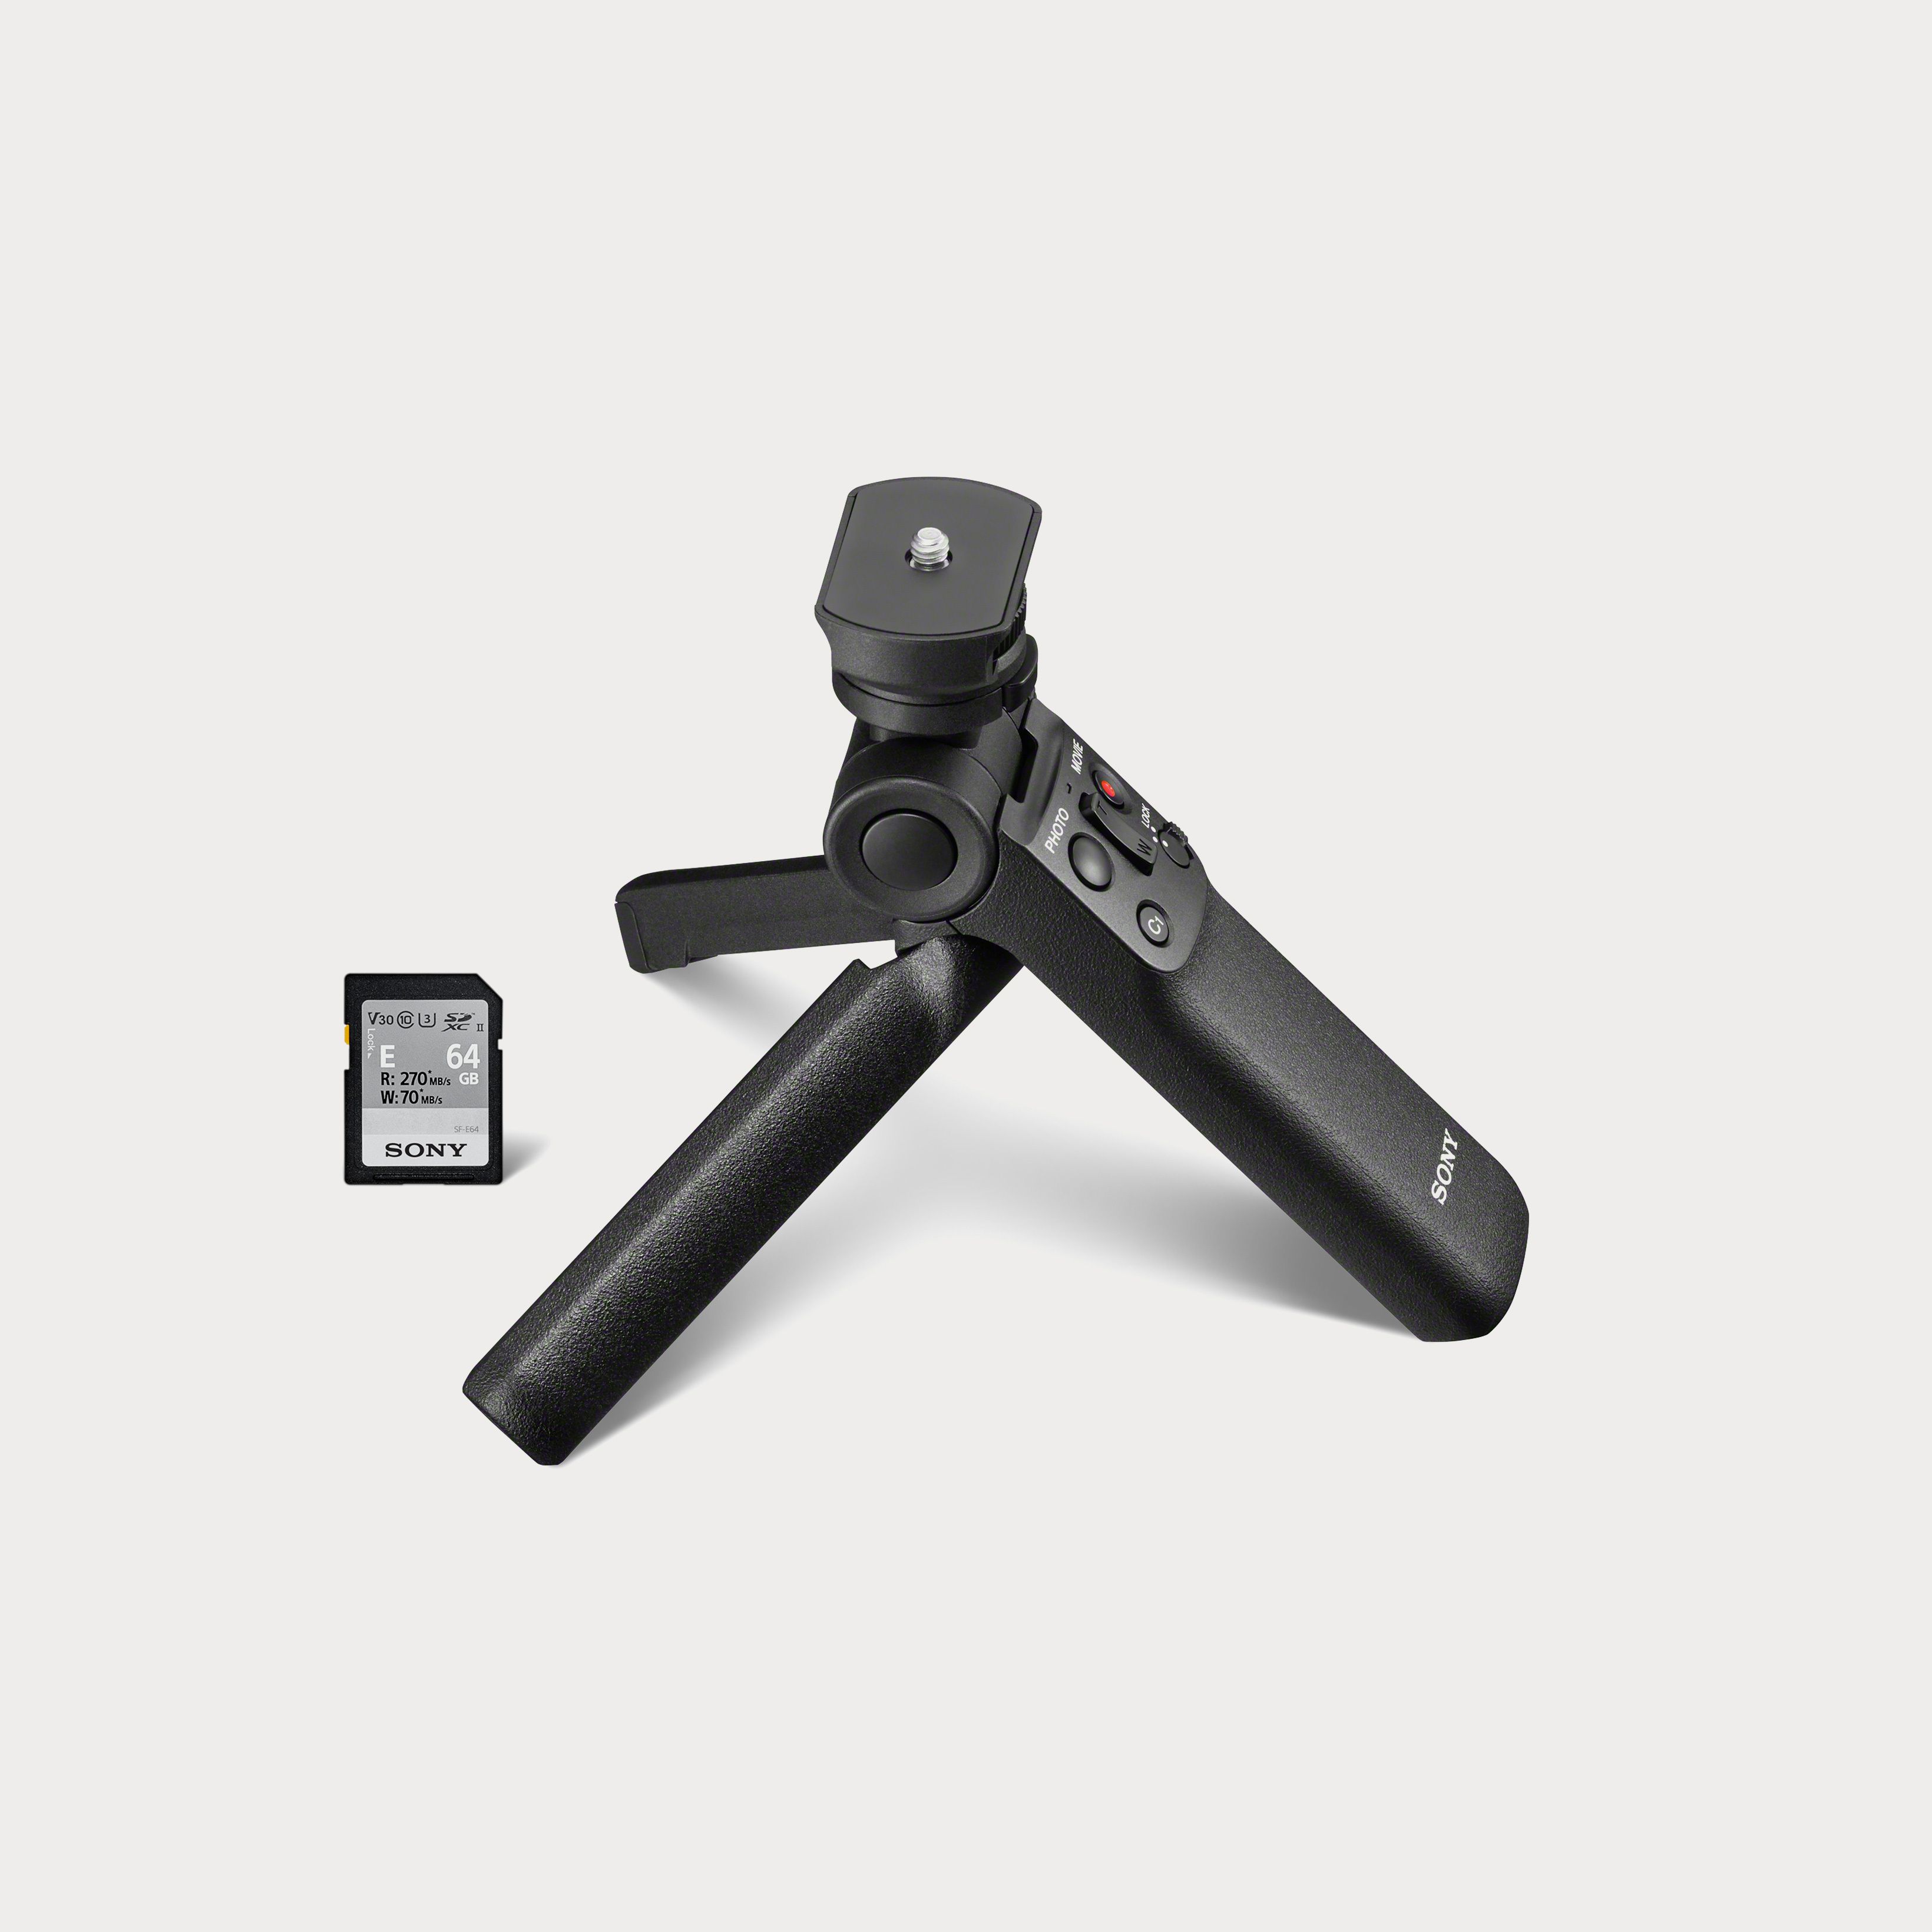 Sony Wireless Bluetooth Shooting Grip and Tripod GPVPT2BT - Black 